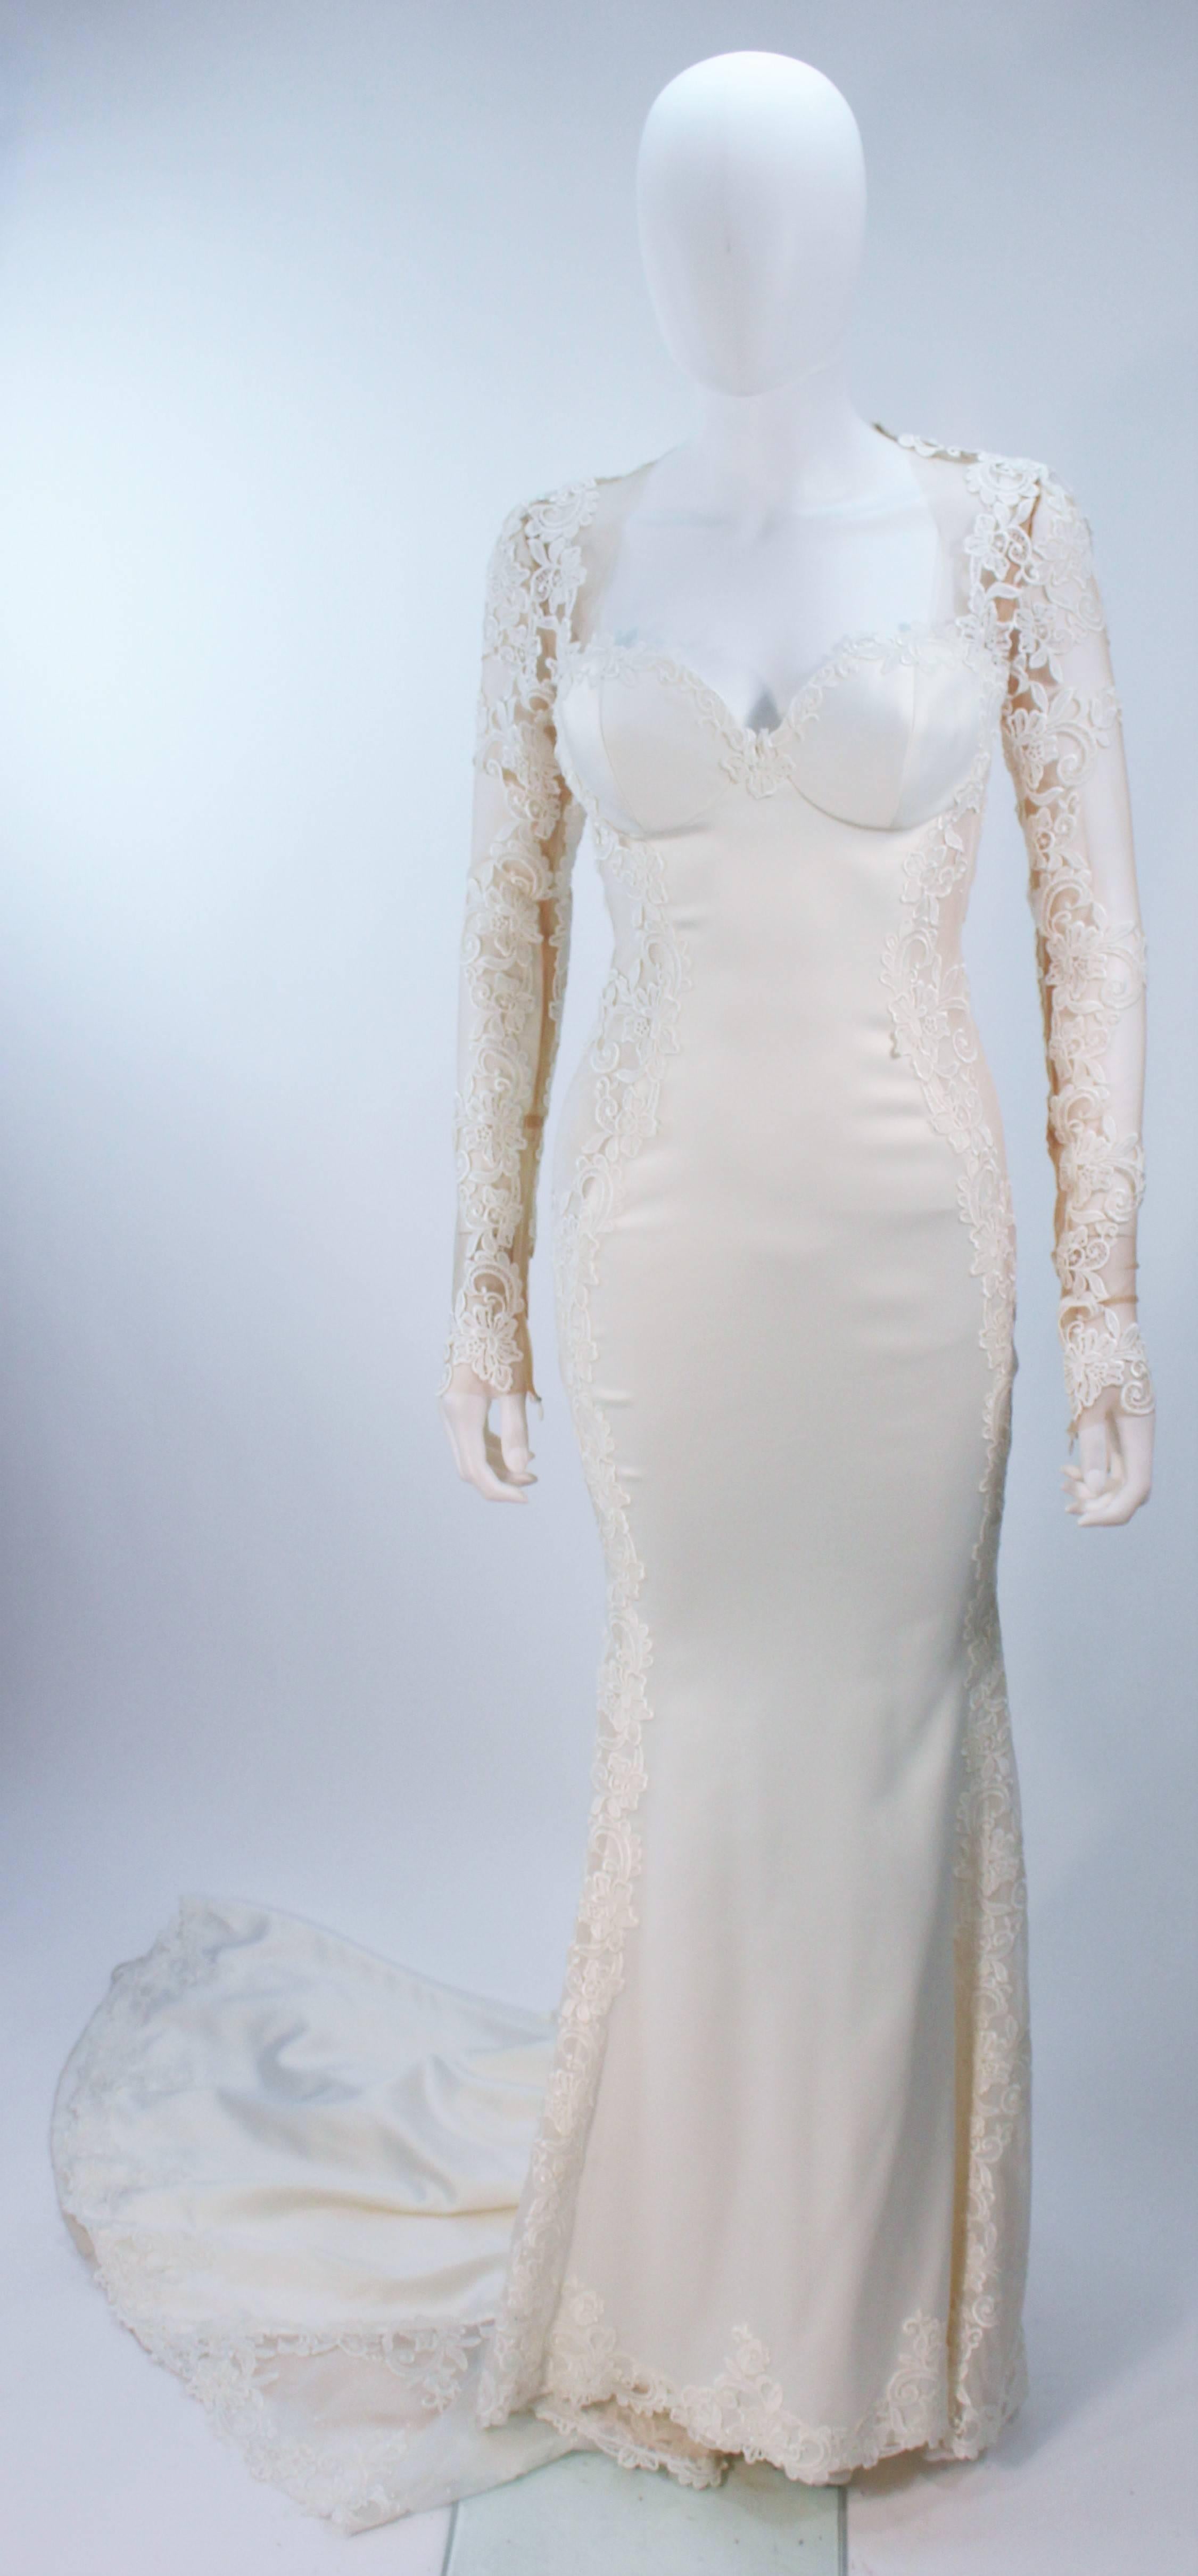  This Galia Lahav  gown is composed of a thick cream jersey with floral applique and sheer details. Features structured cups, and a side zip closure with snaps. An absolutely stunning design. In excellent vintage condition. 

  **Please